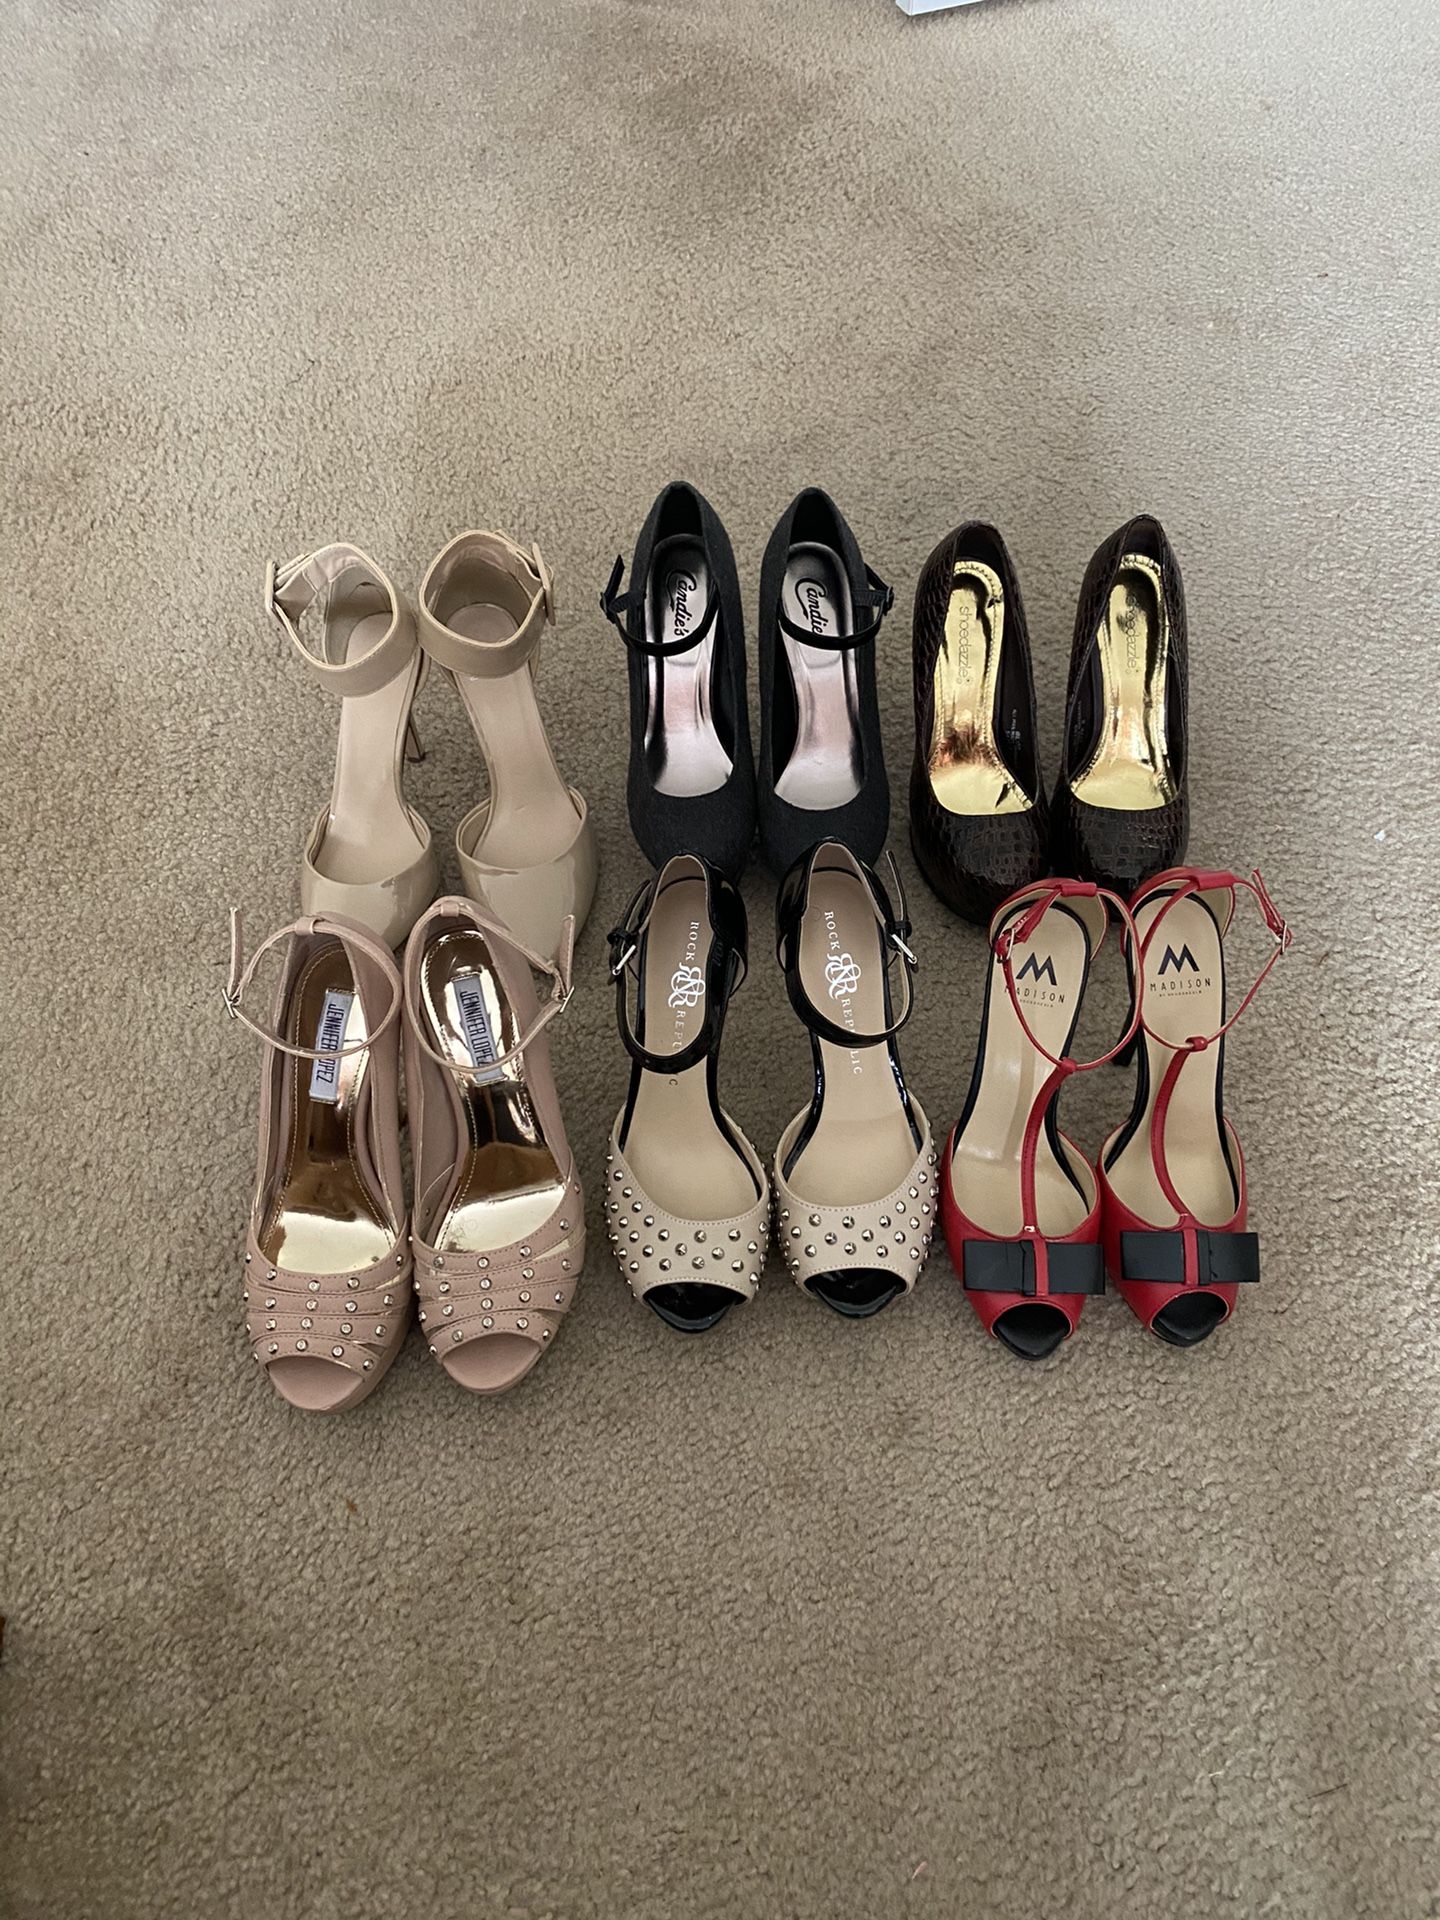 High heels shoes, size 8, some of them are barely used, great condition